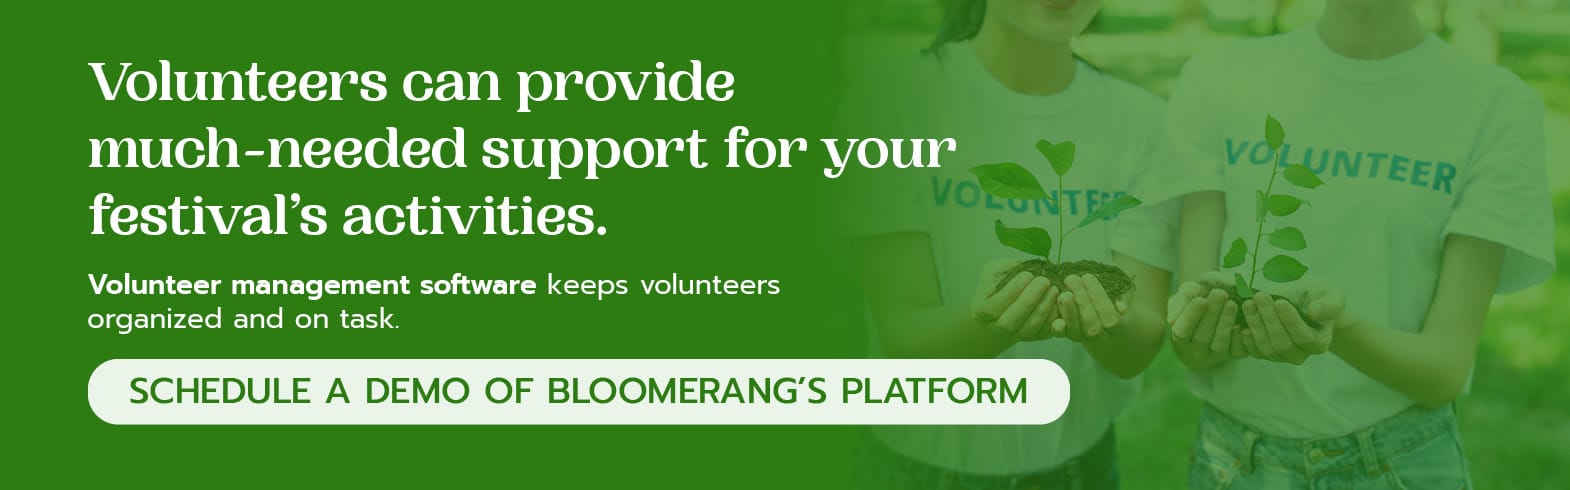 Schedule a Bloomerang demo to see how volunteer management software can help streamline your music festival's activities.